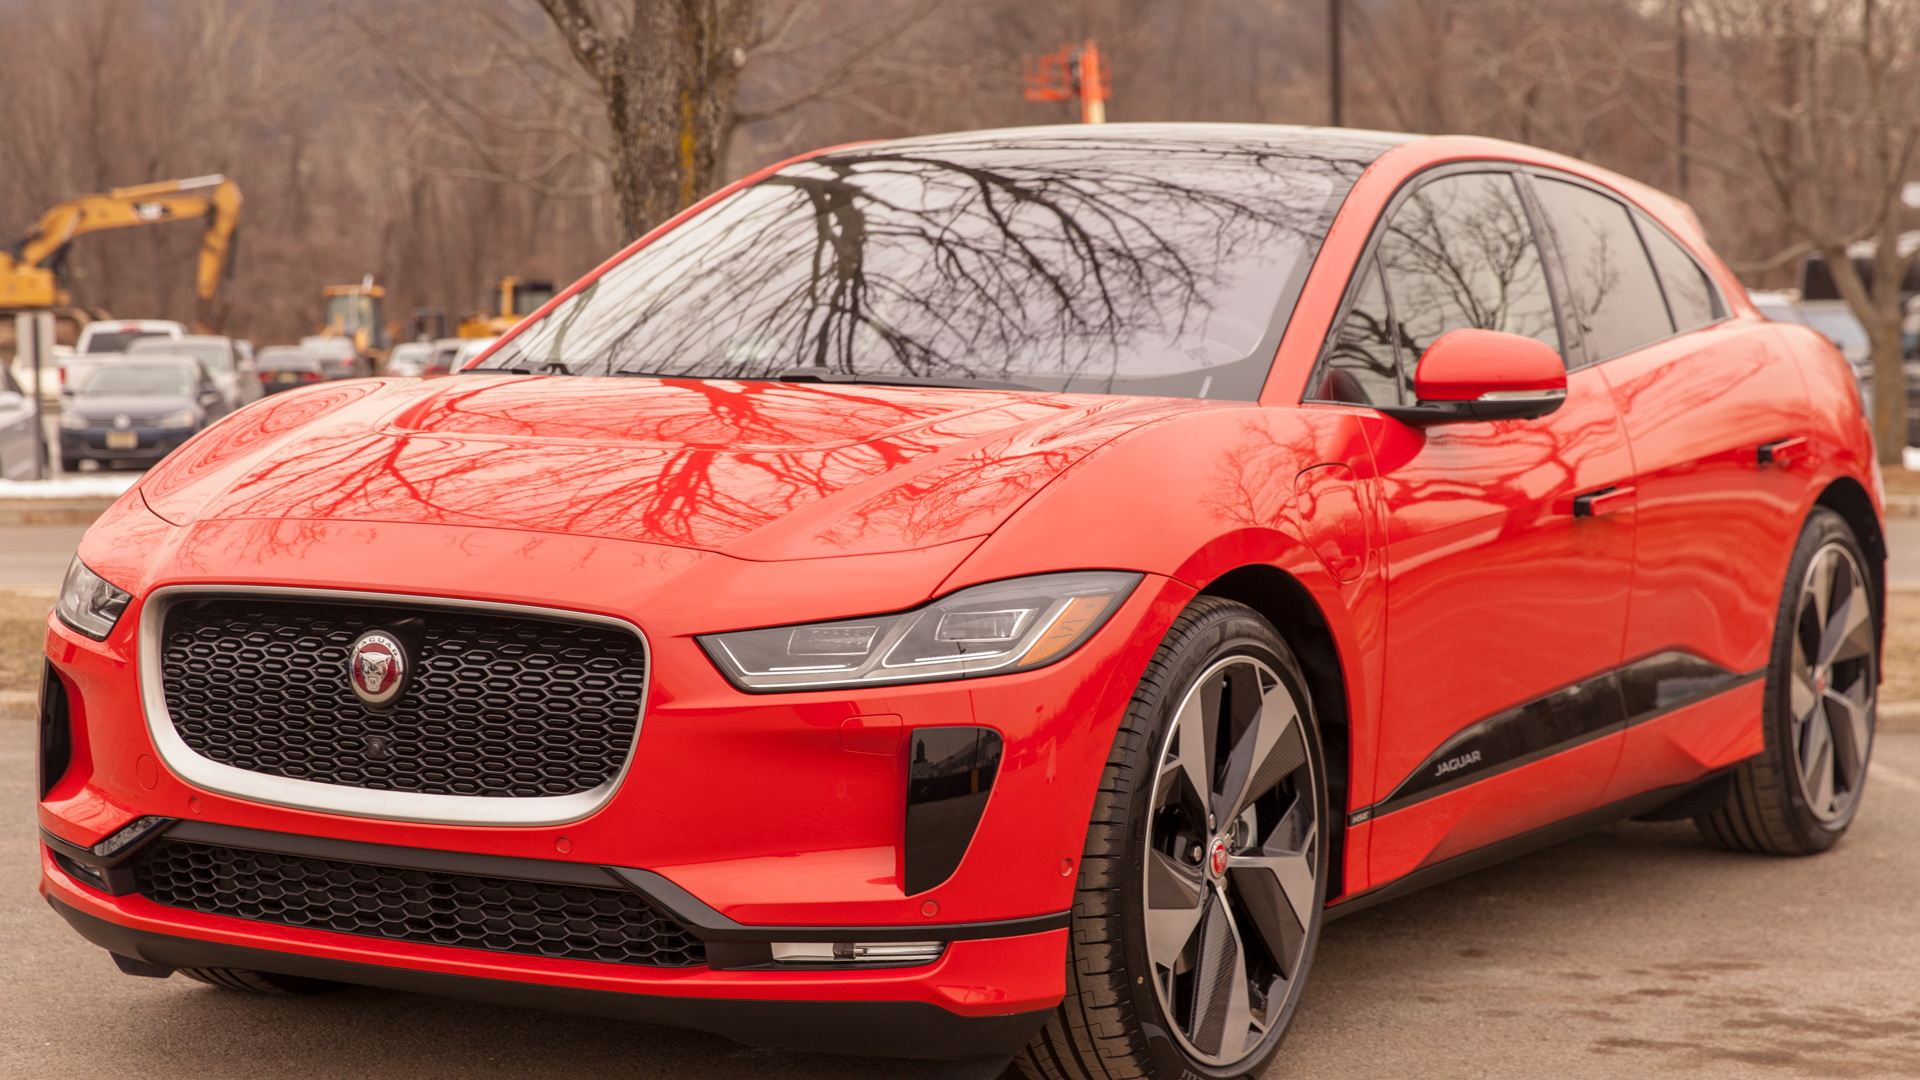 2019 Jaguar I-Pace: brief first drive of all-electric ...